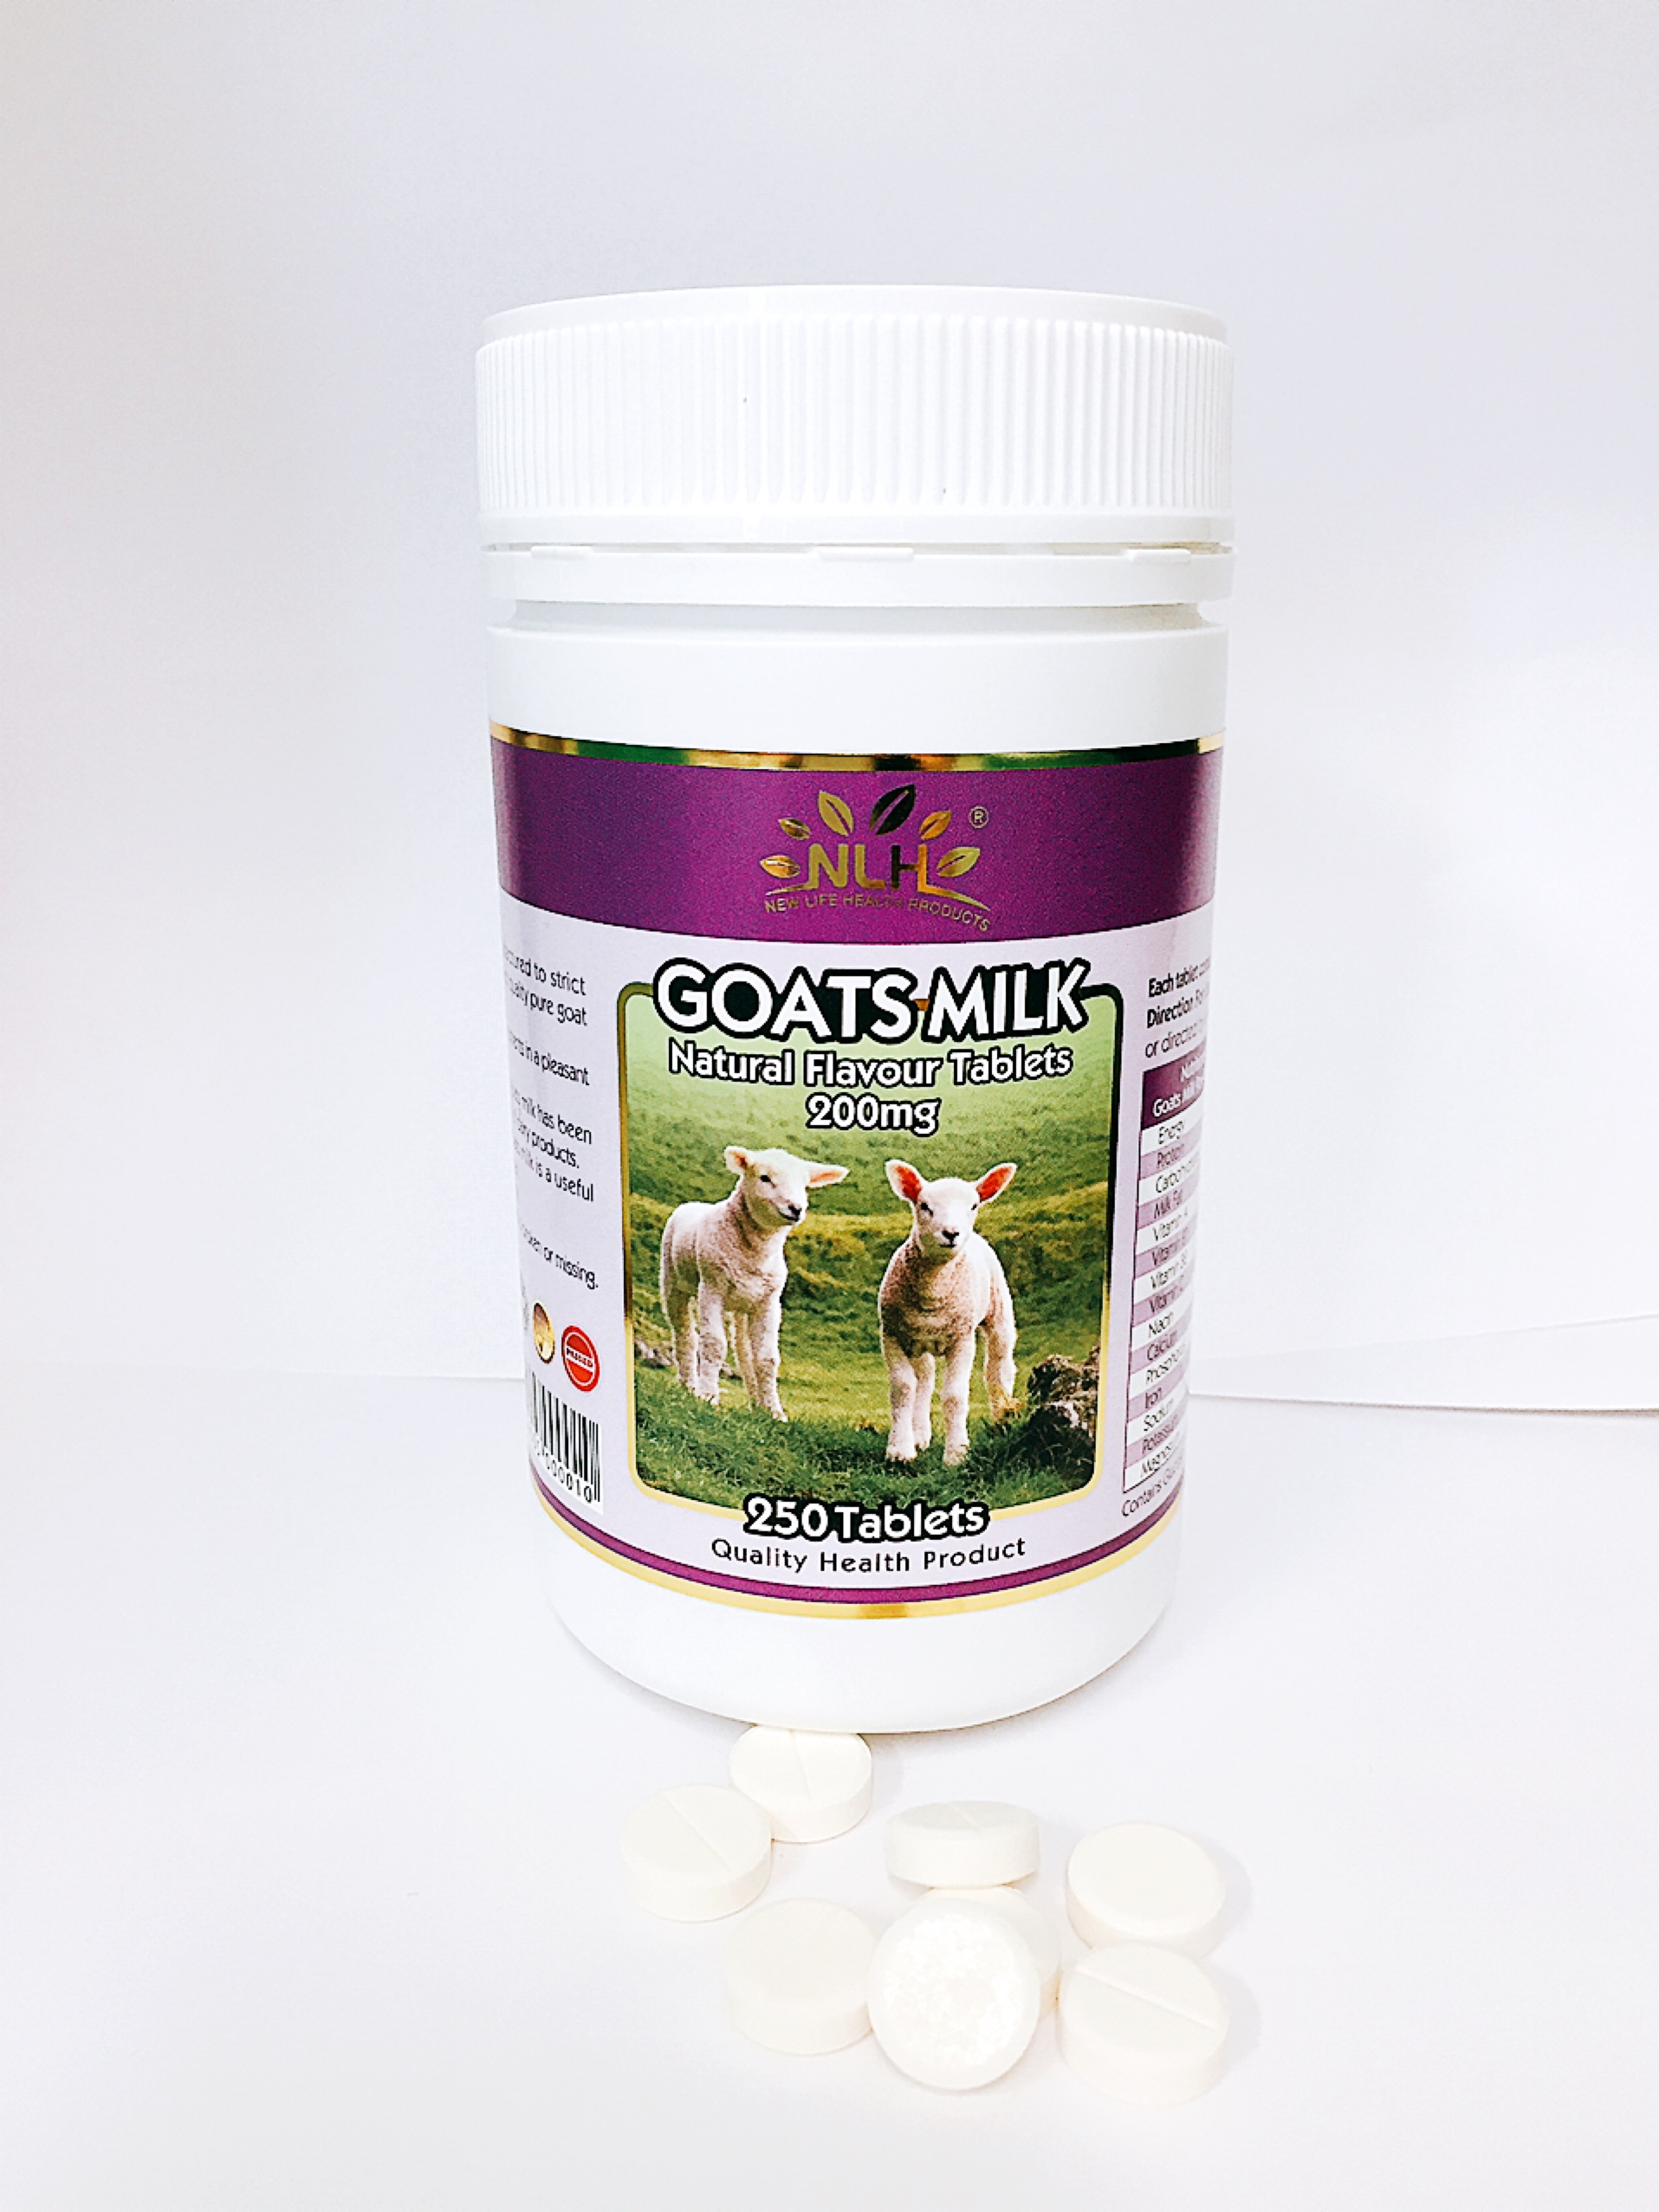 Goats milk 200mg -Natural Flavour (250 tablets)